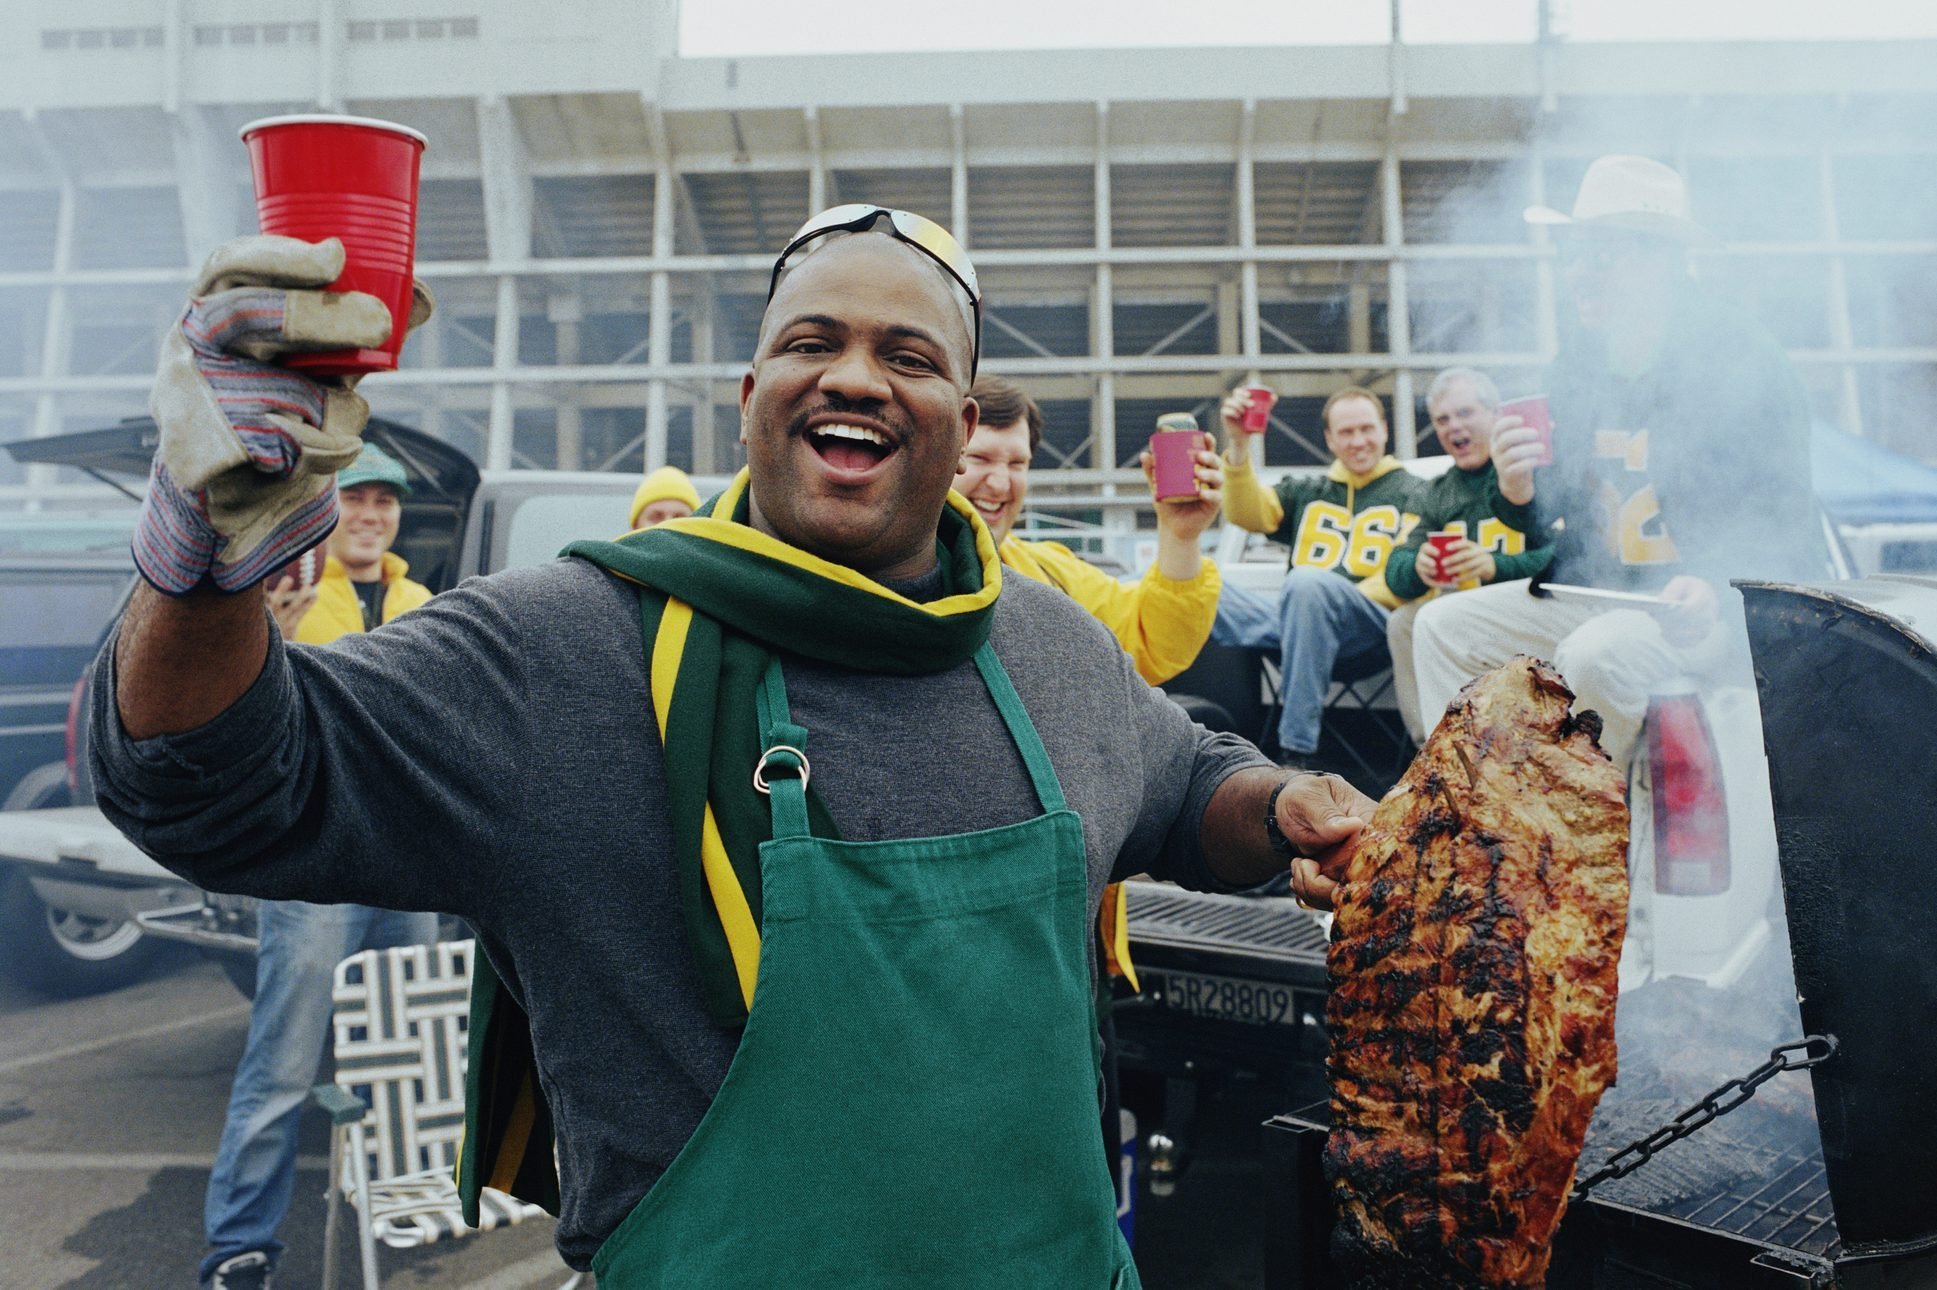 Football Food Safety: 5 Tips for Your Next Tailgate, From a Microbiology Expert